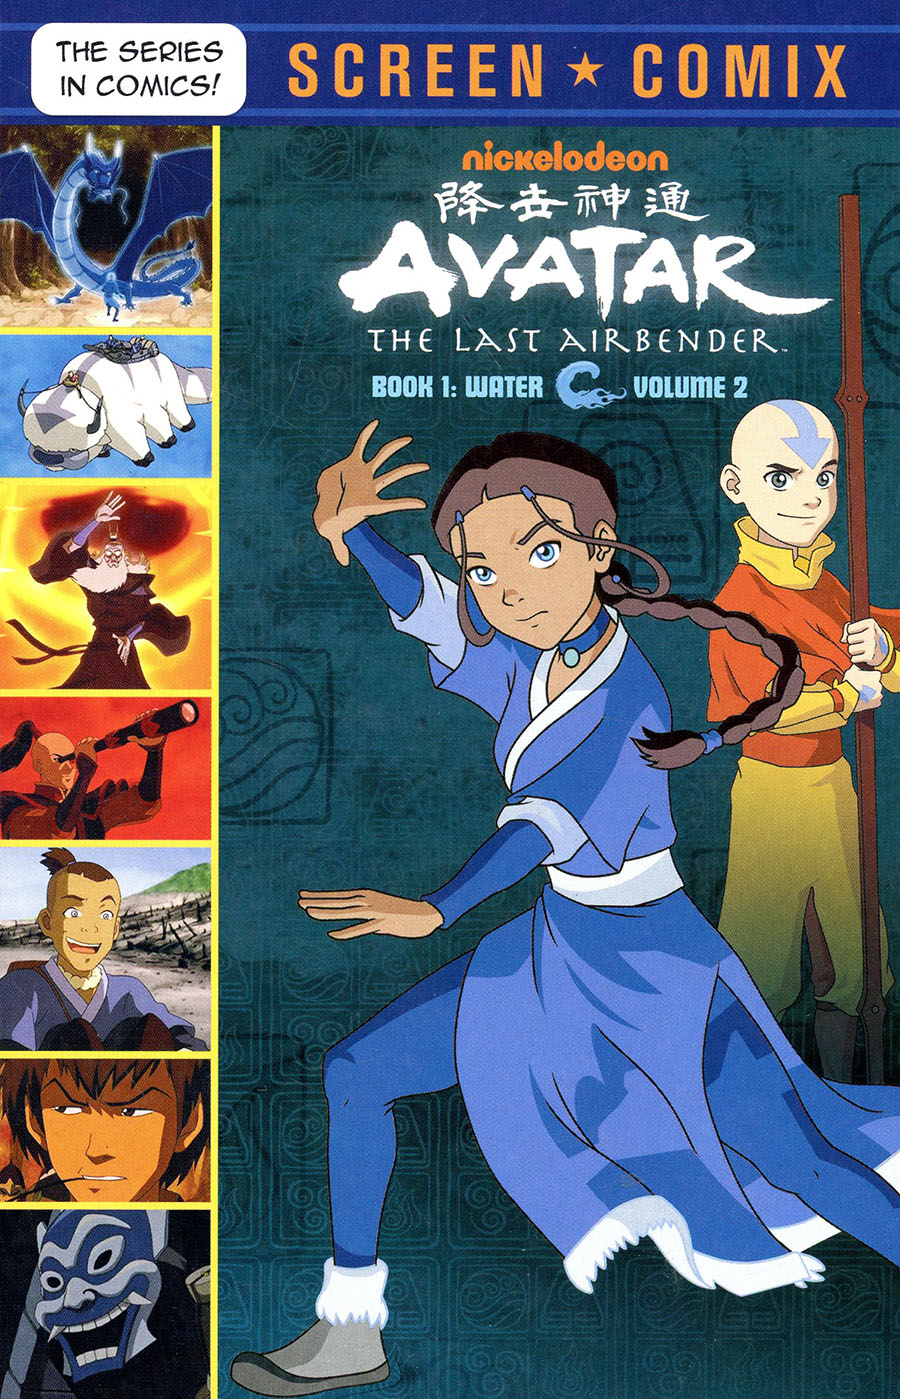 Avatar The Last Airbender Screen Comix Book 1 Water Vol 2 TP